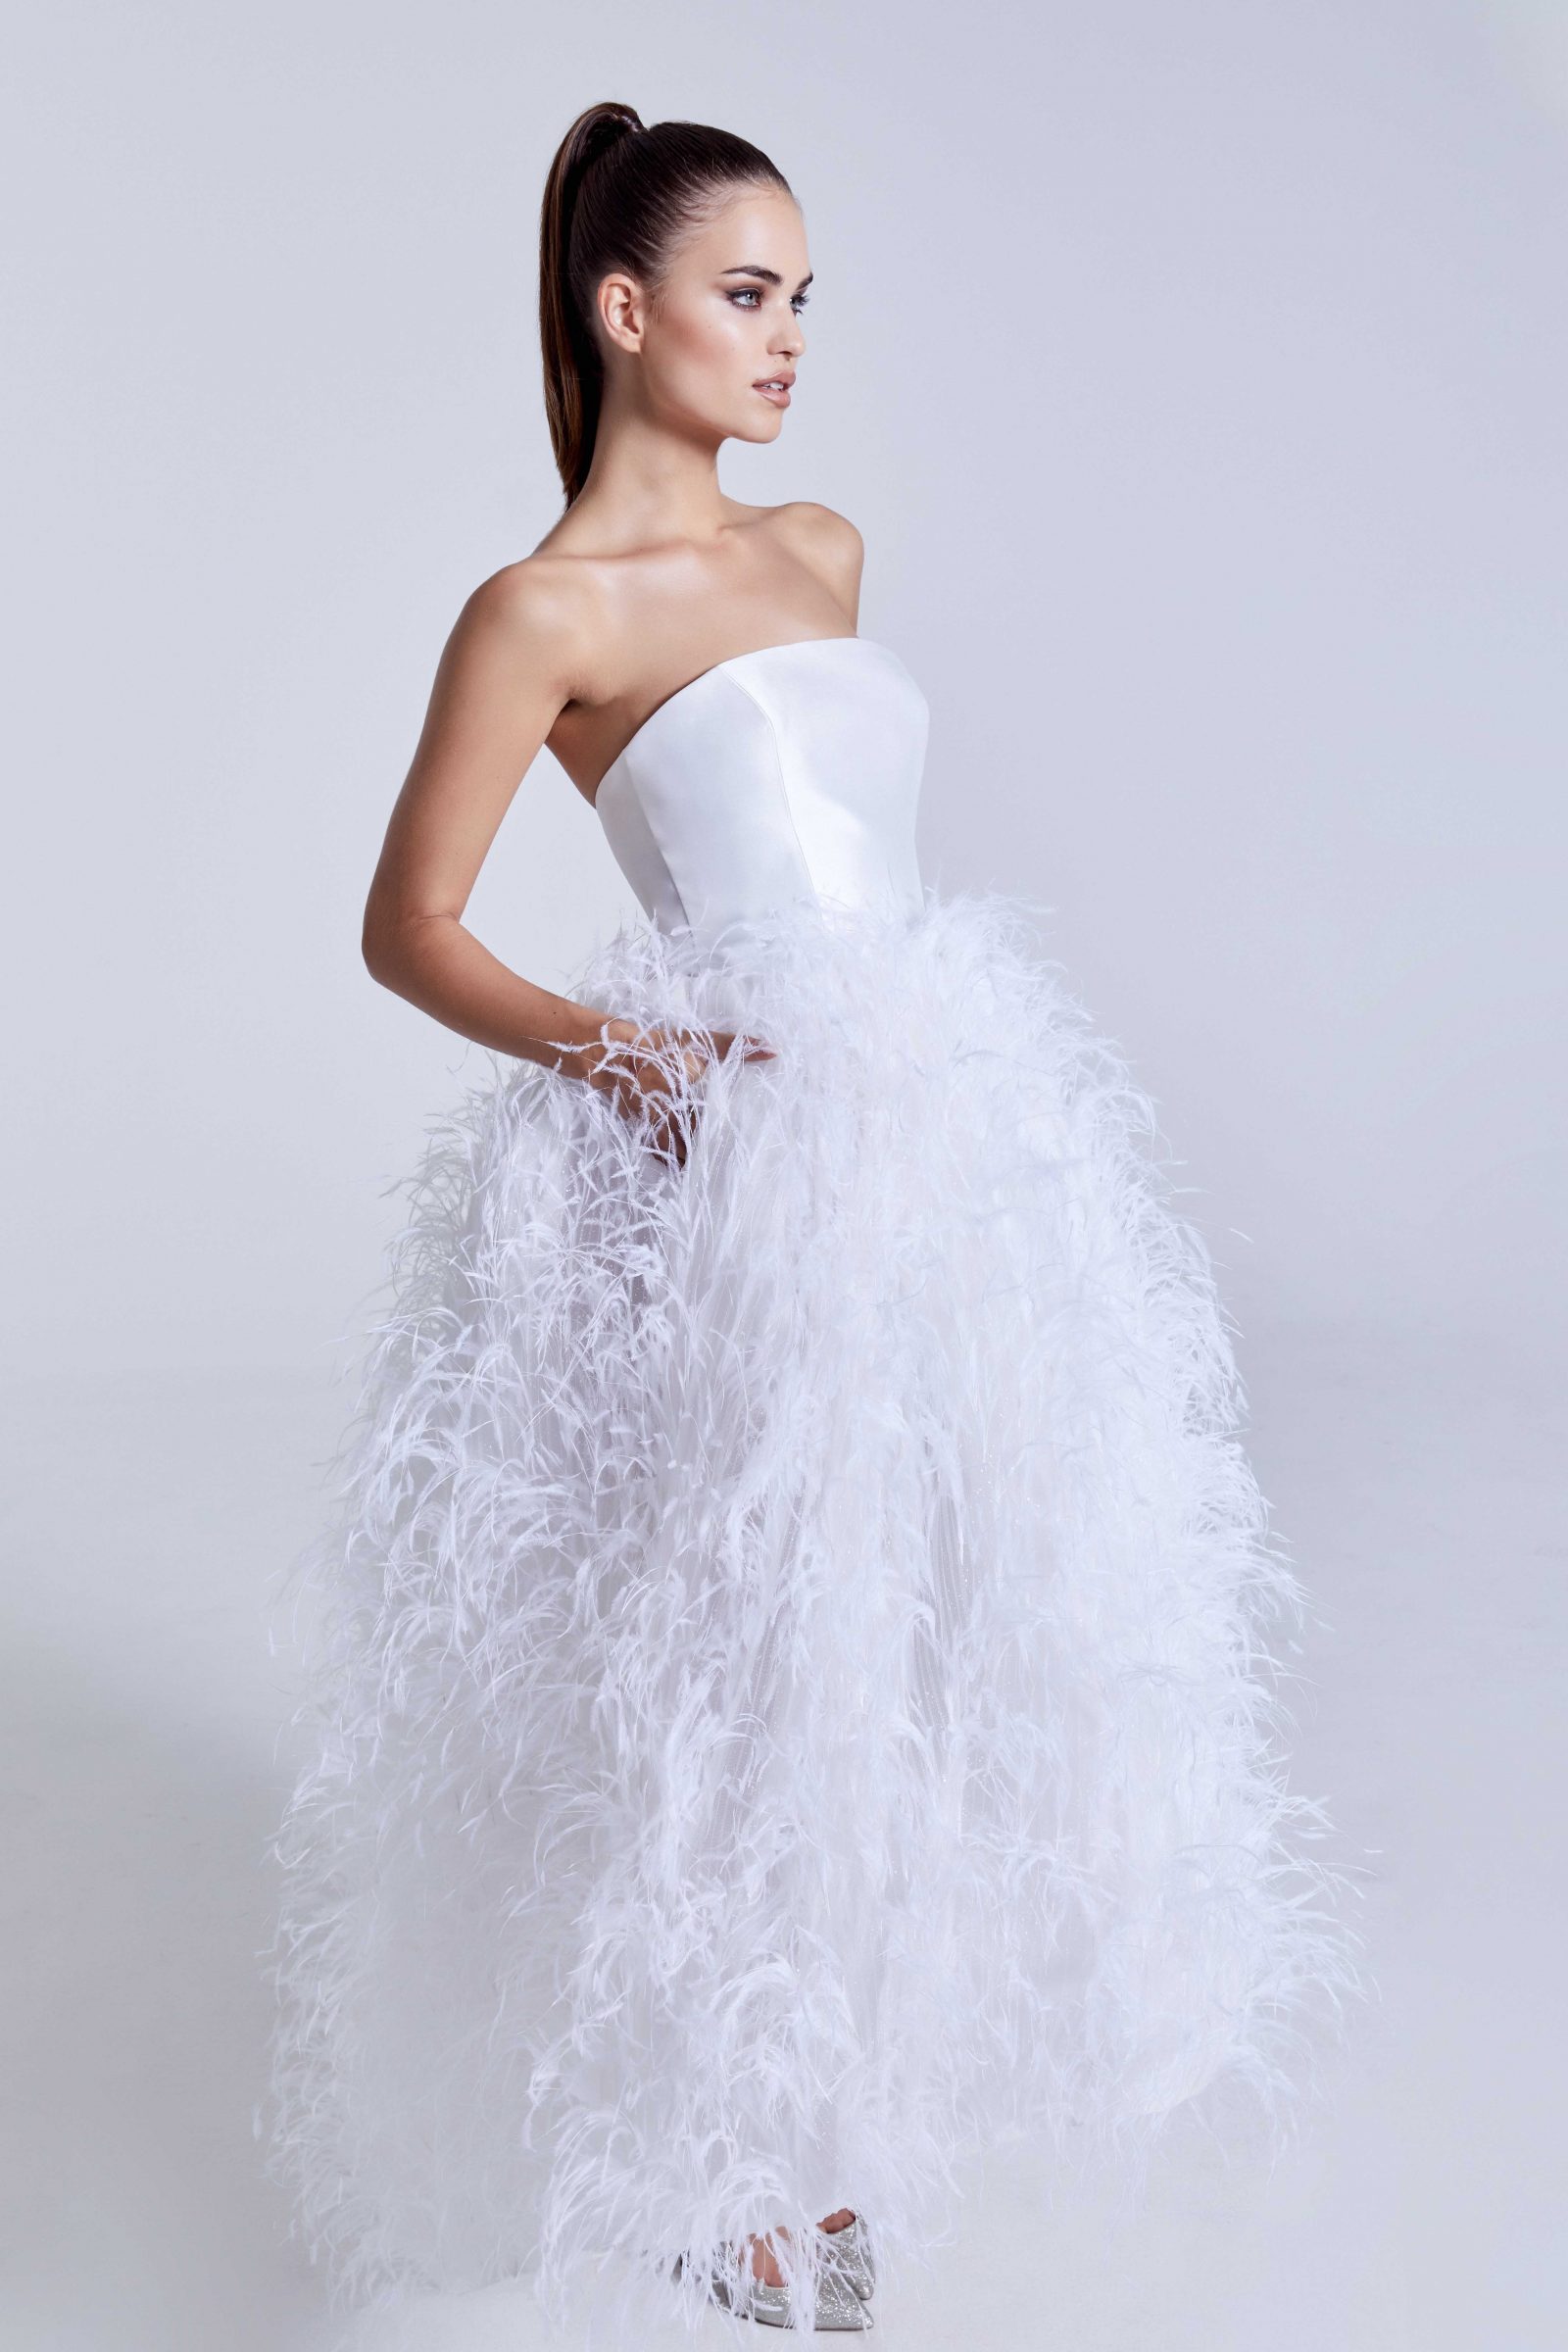 Simple strapless top bridal gown with feathered skirt